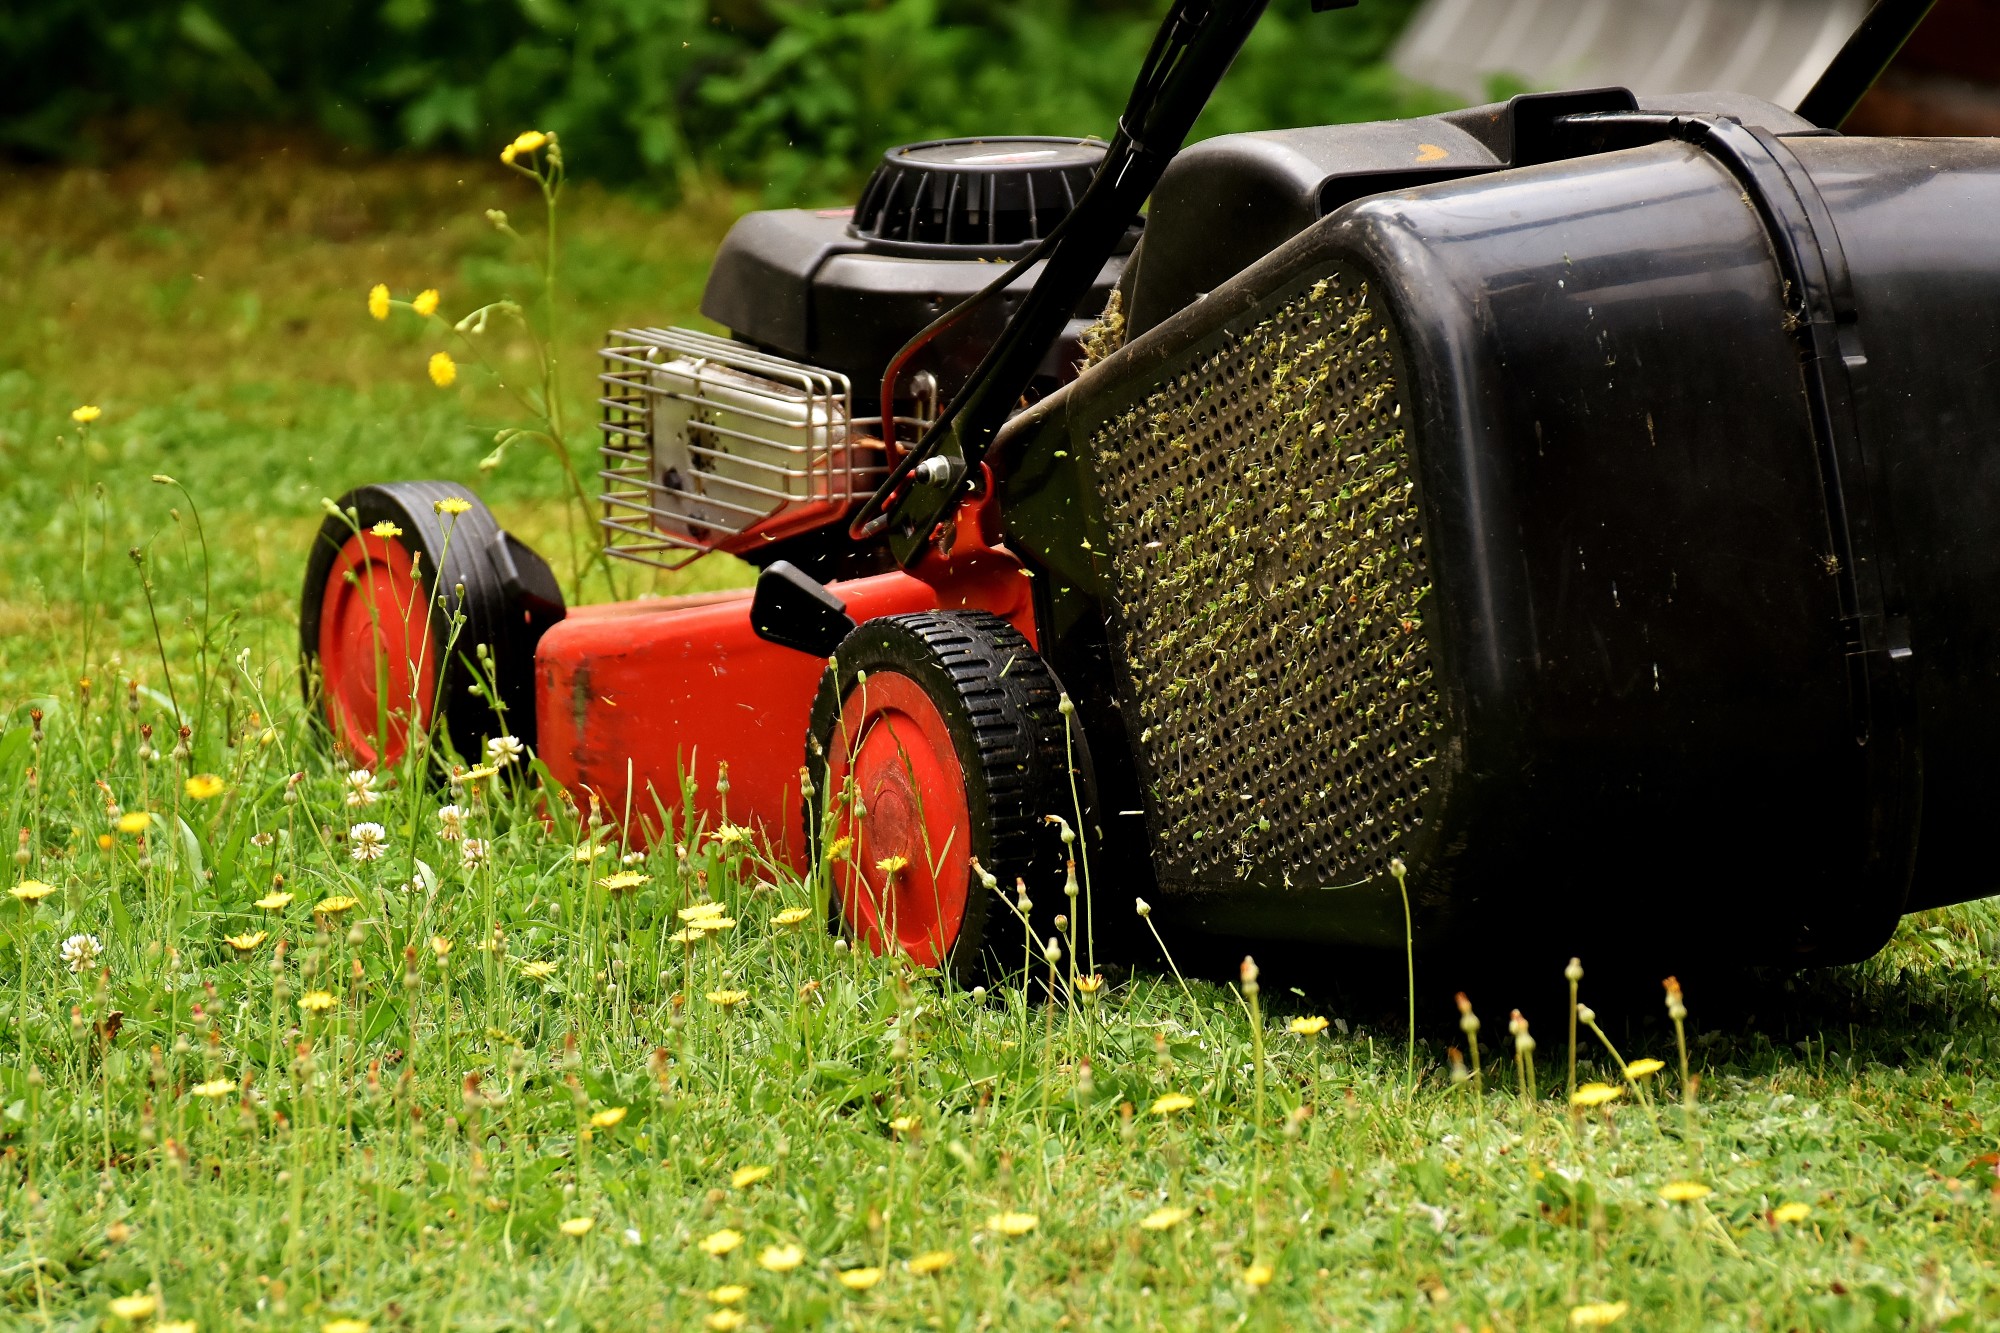 5 Compelling Reasons to Hire a Professional Lawn Mowing Service